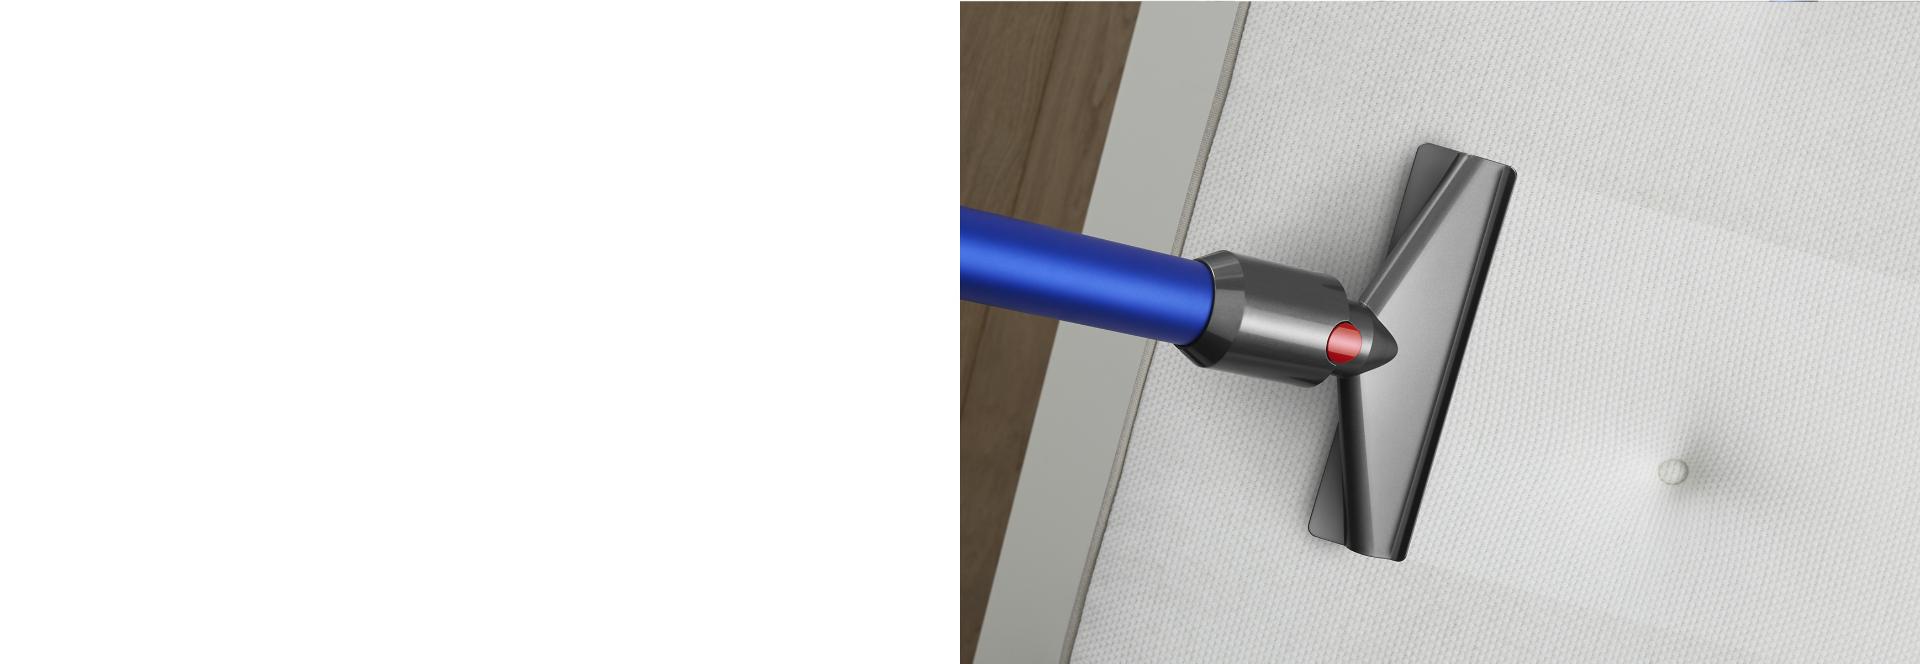 Dyson Mattress tool cleaning